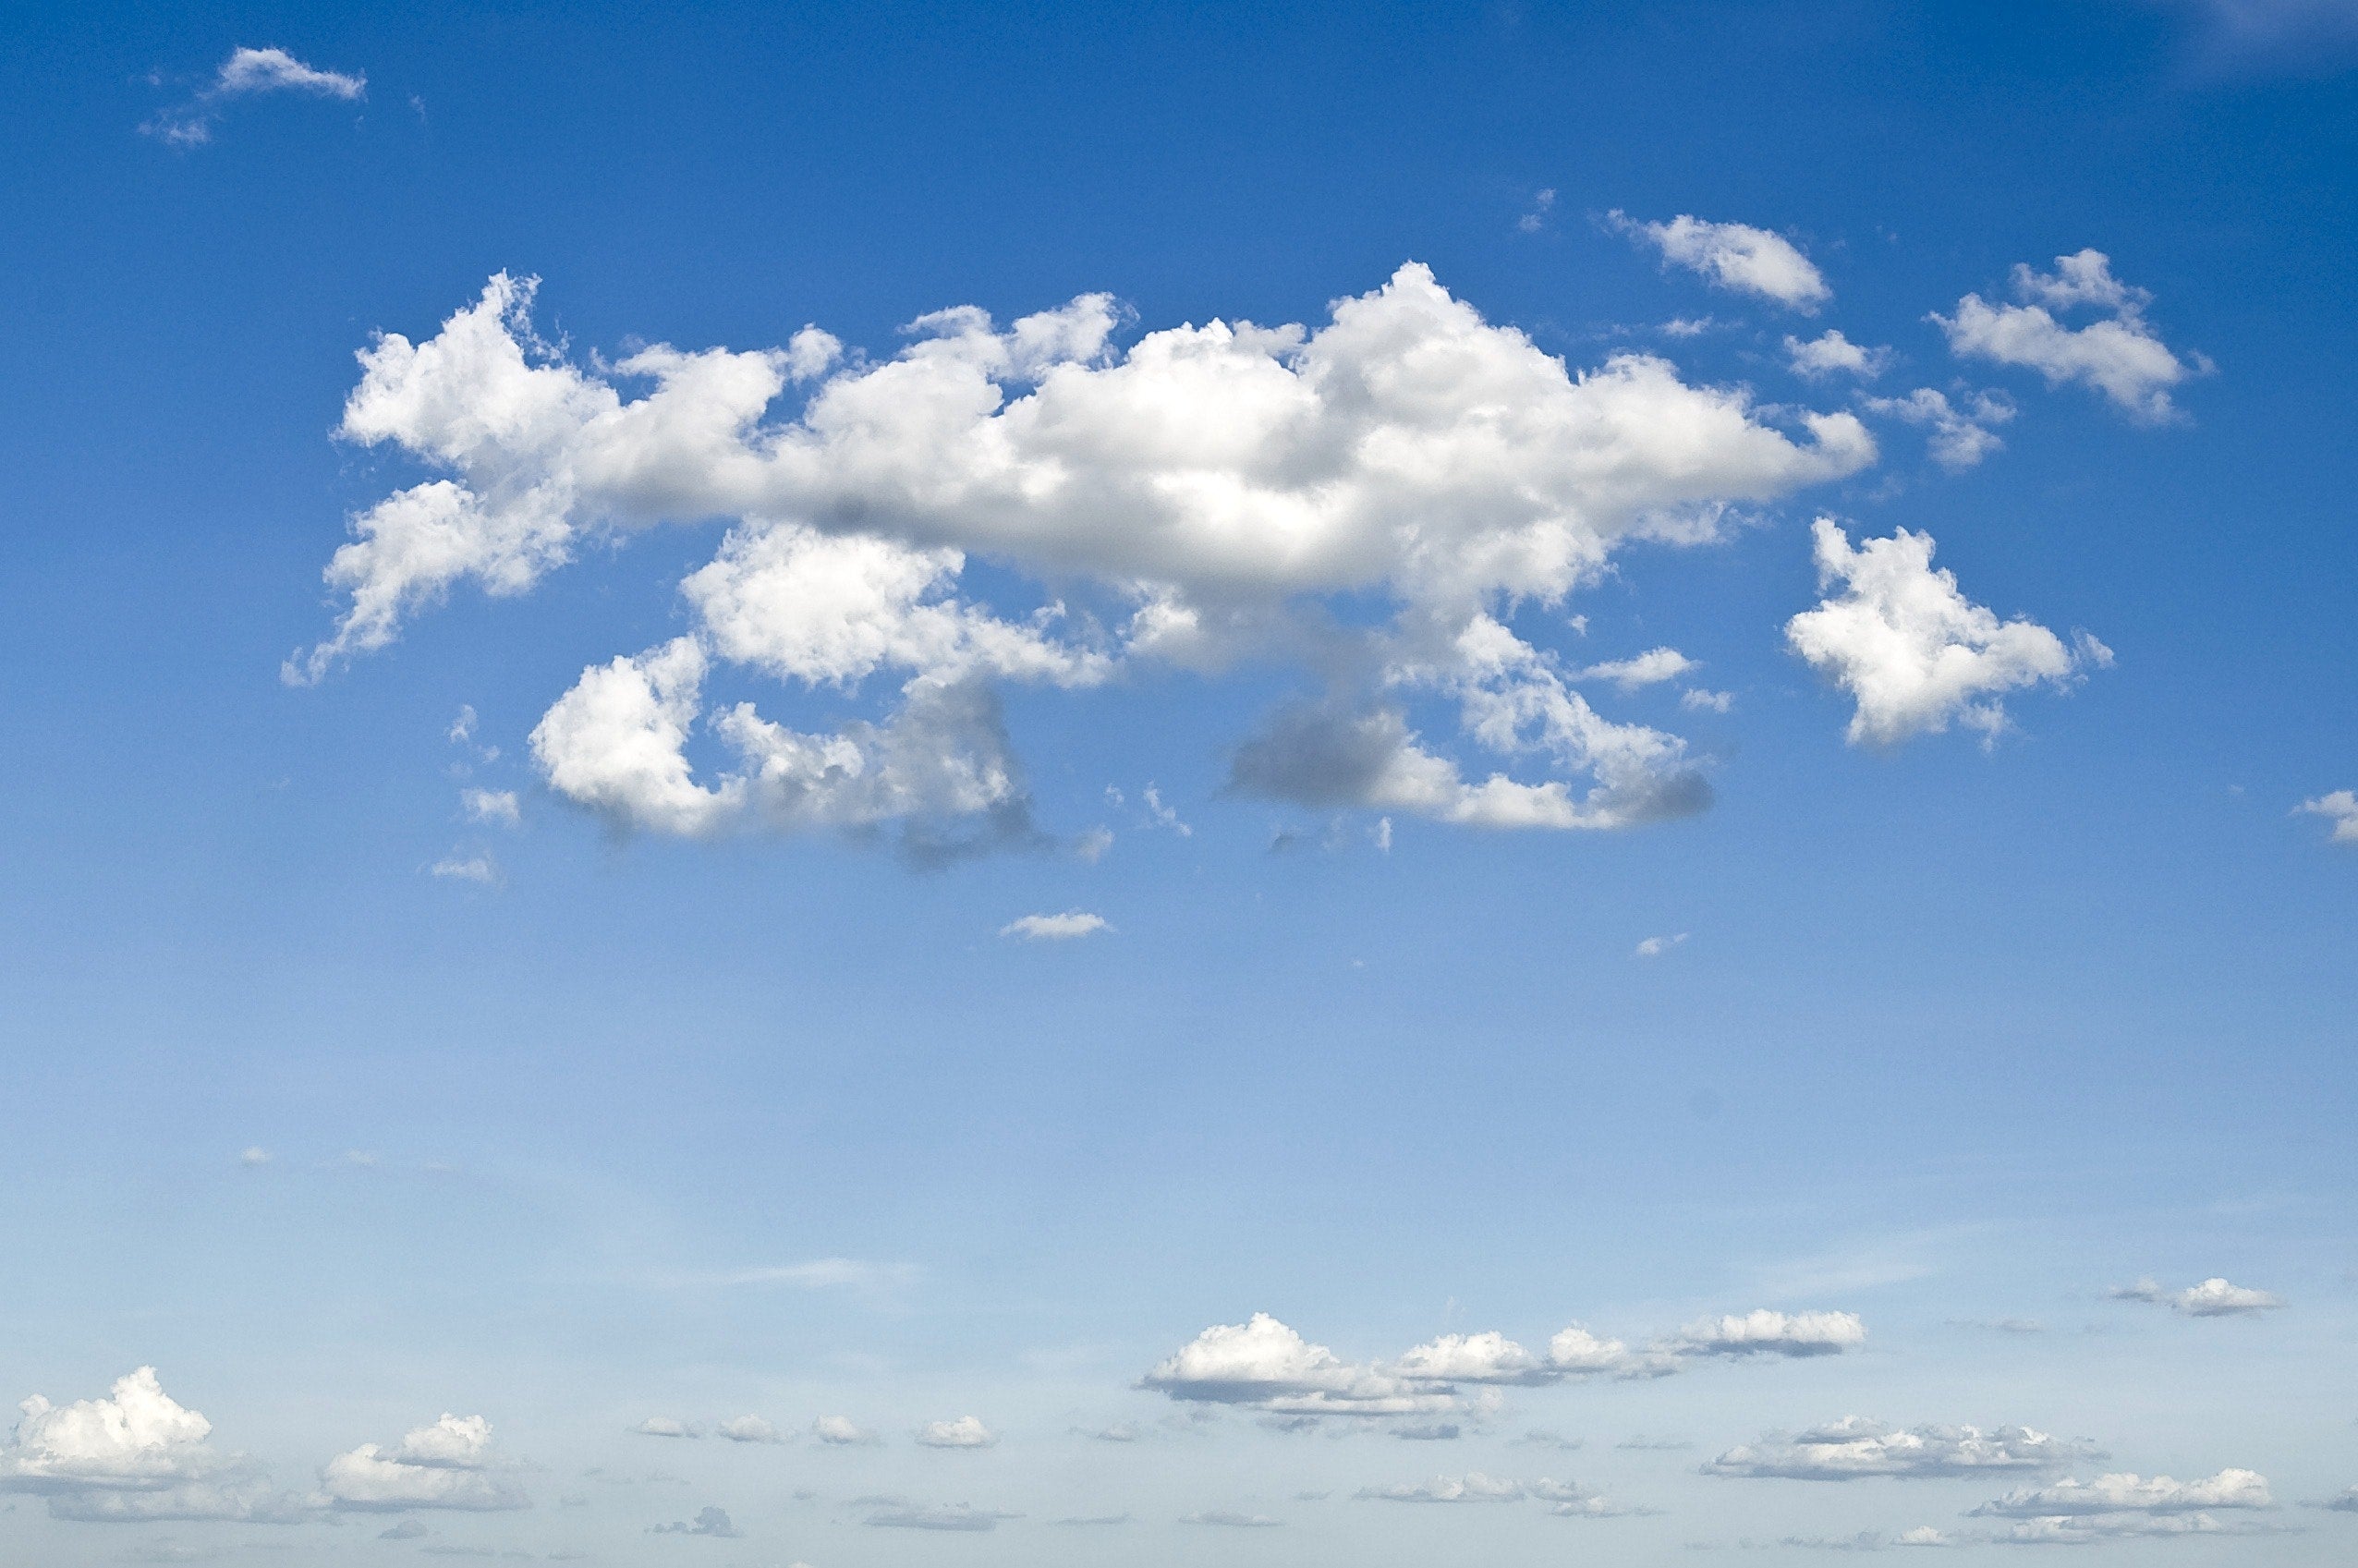 Cloud computing has become a favourite topic in company listings